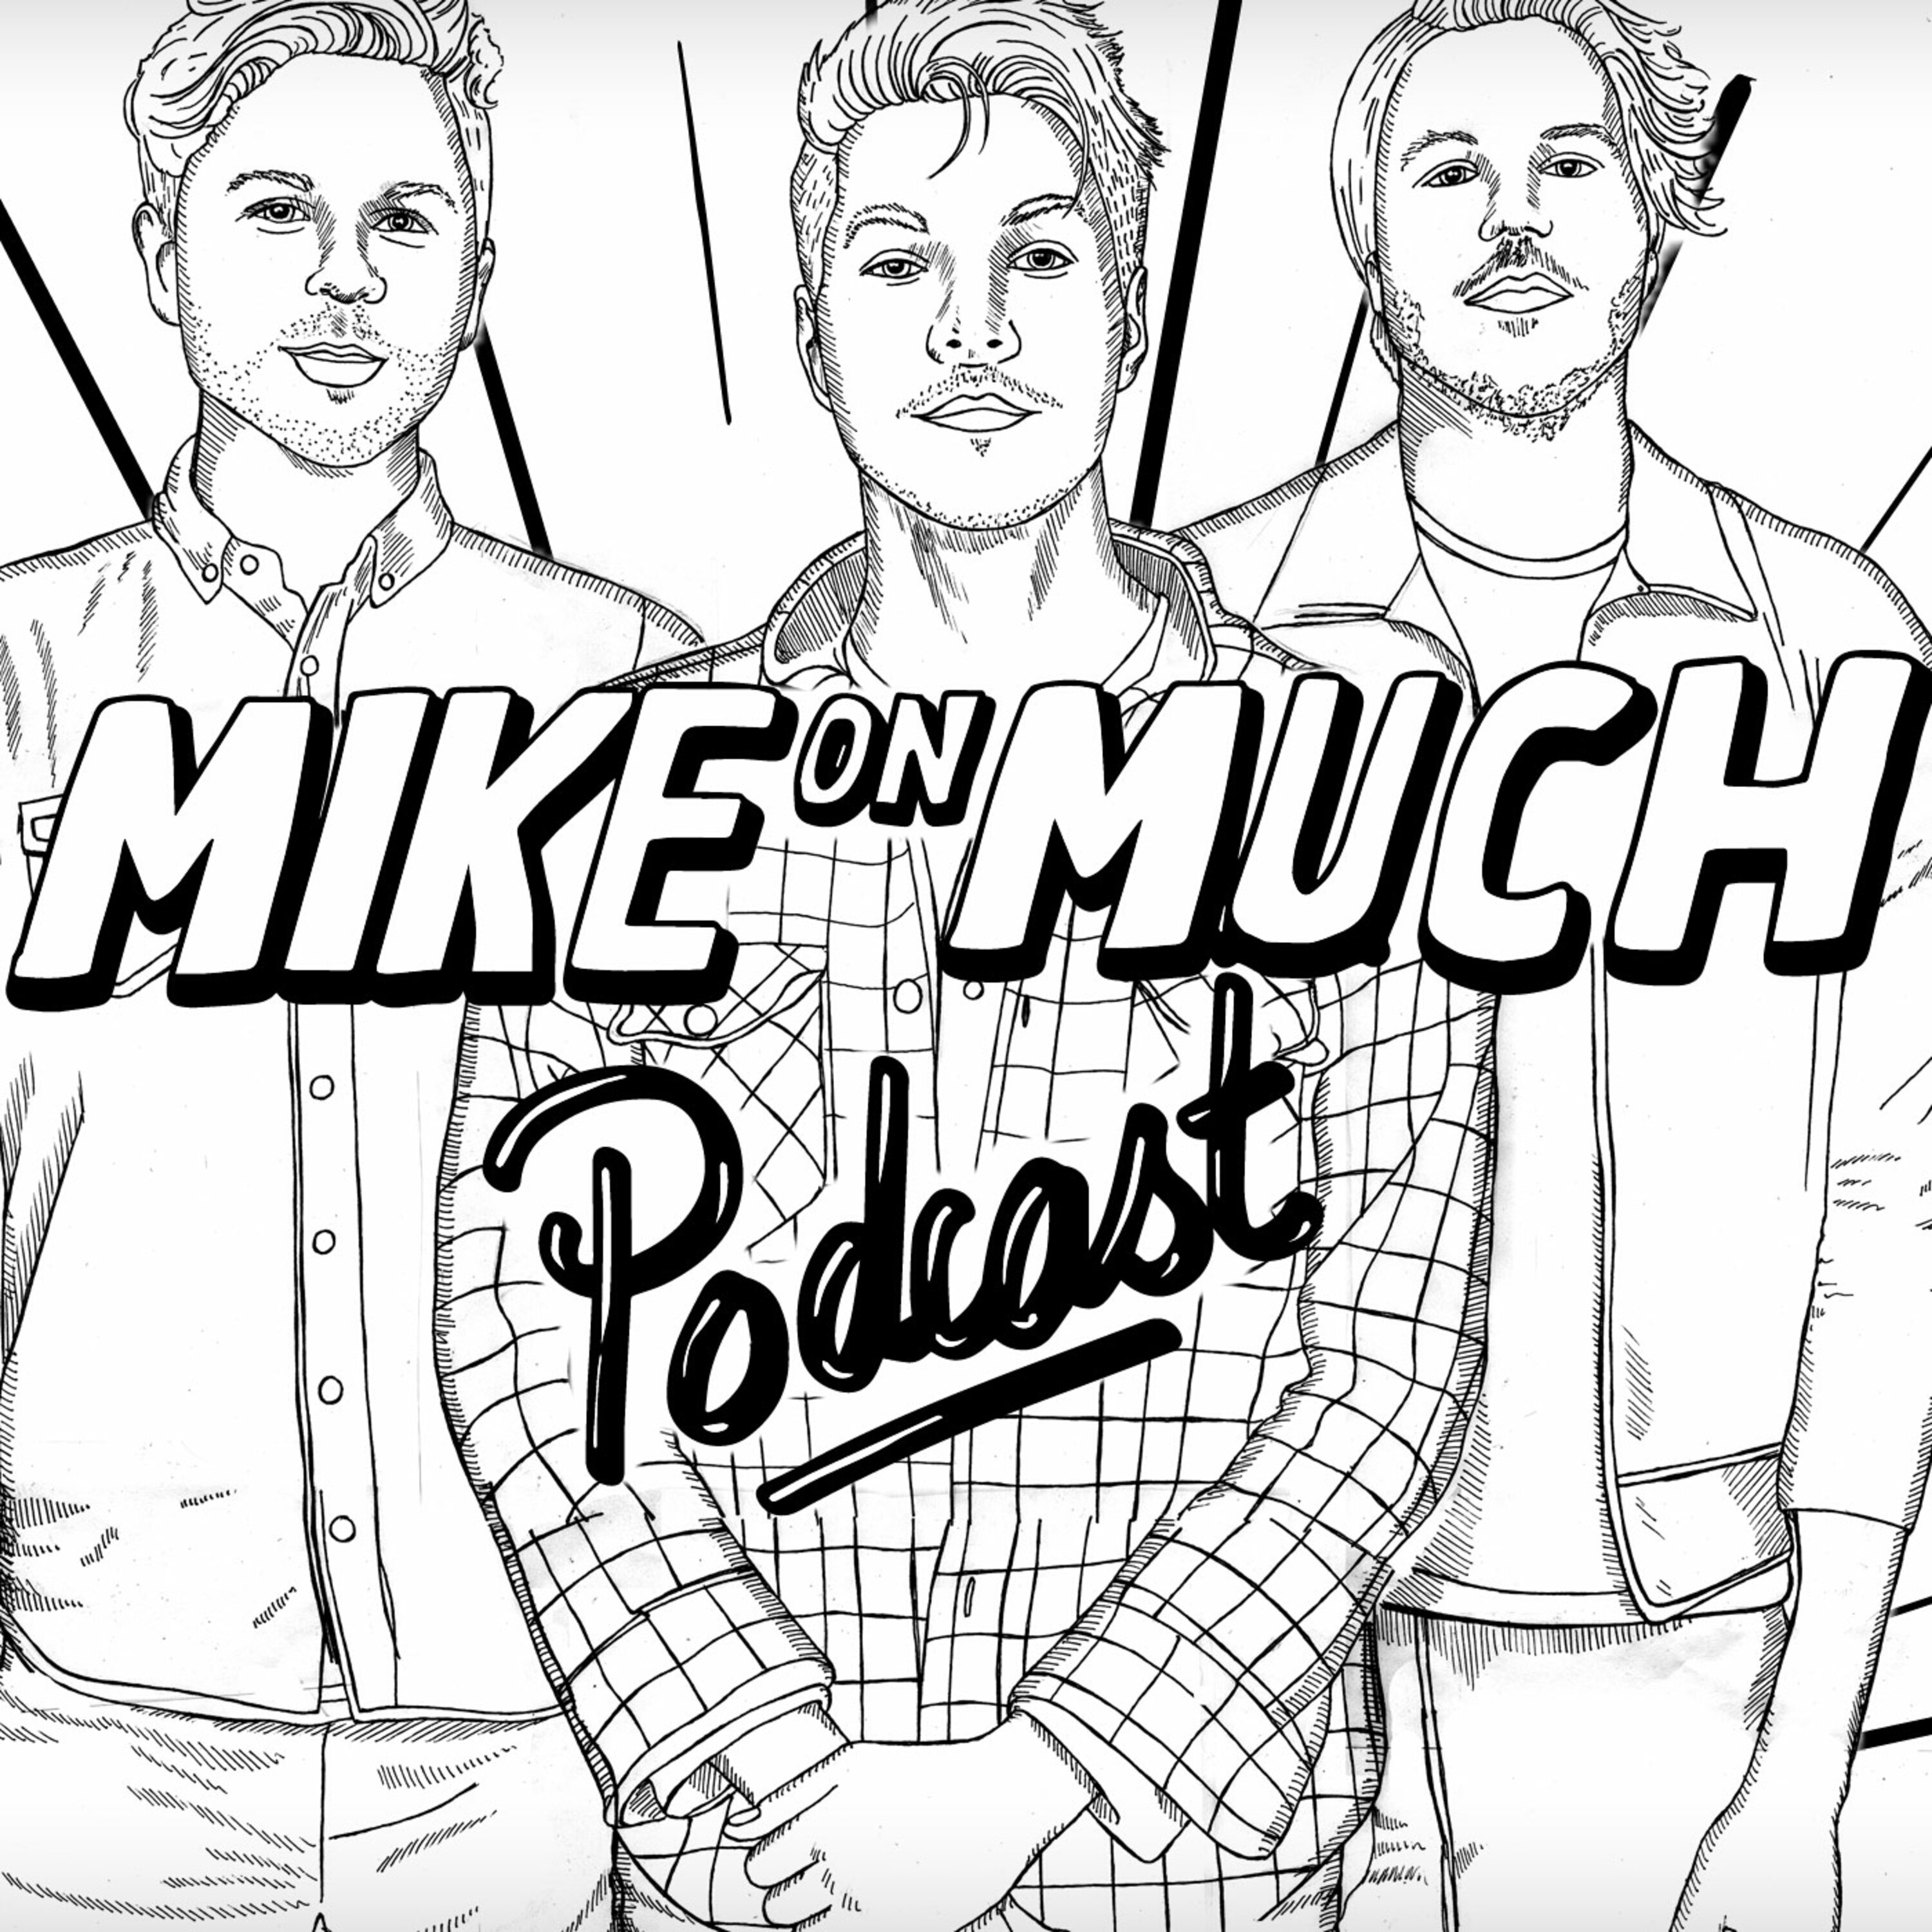 Season 1 Mike On Much: “Steve Aoki’s Throwing A Cake In Your Face”